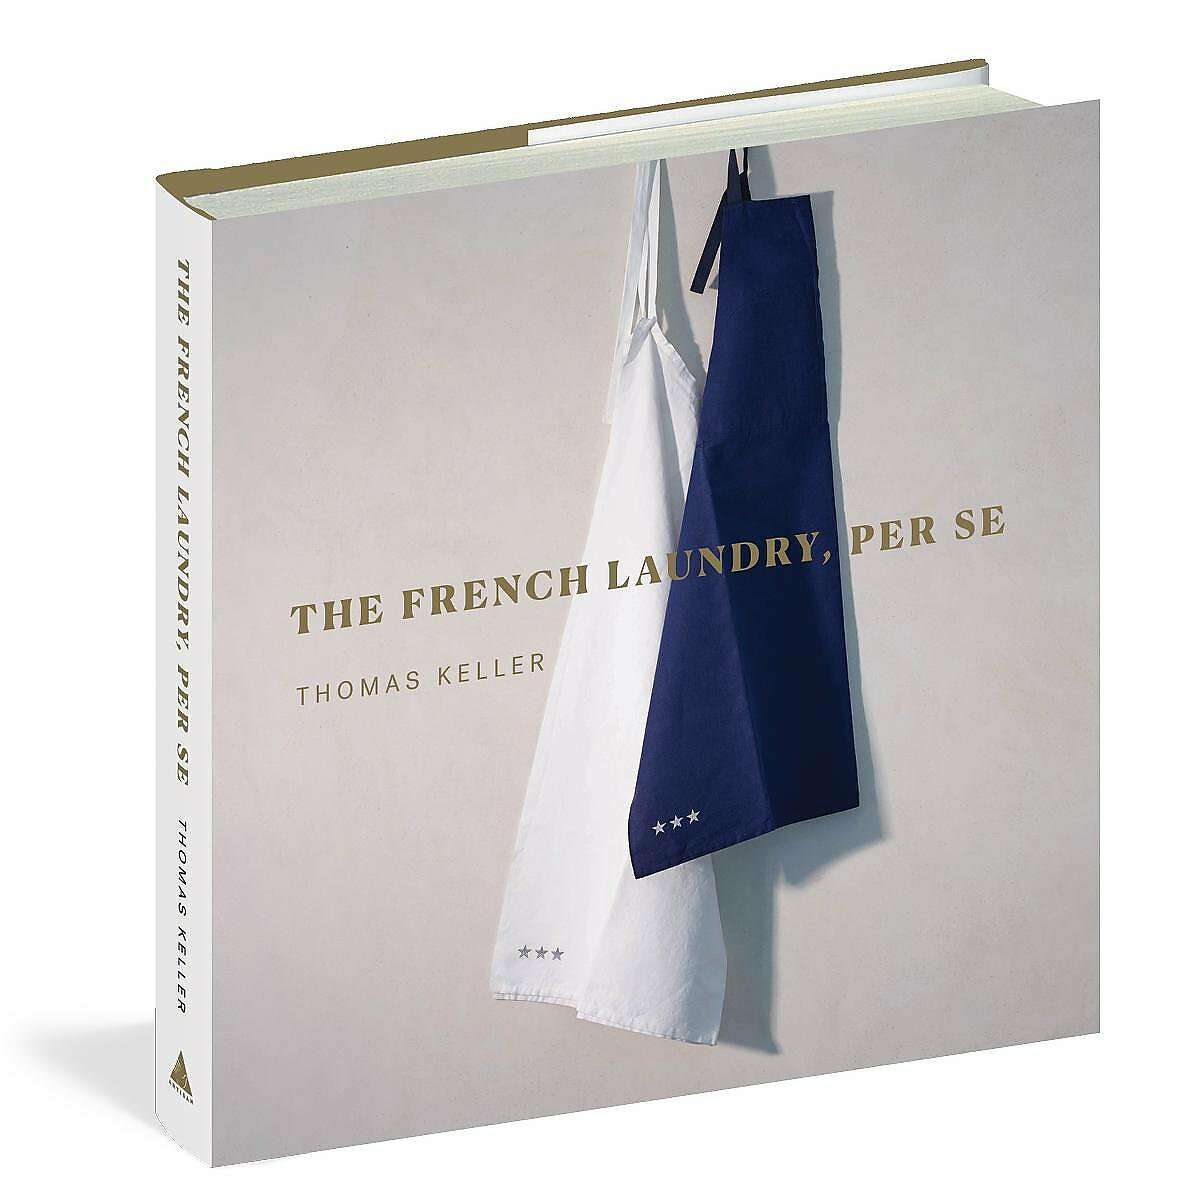 “The French Laundry, Per Se,” by Thomas Keller (Workman Publishing; 394 pages; $75 hardback; $24.95 online edition).